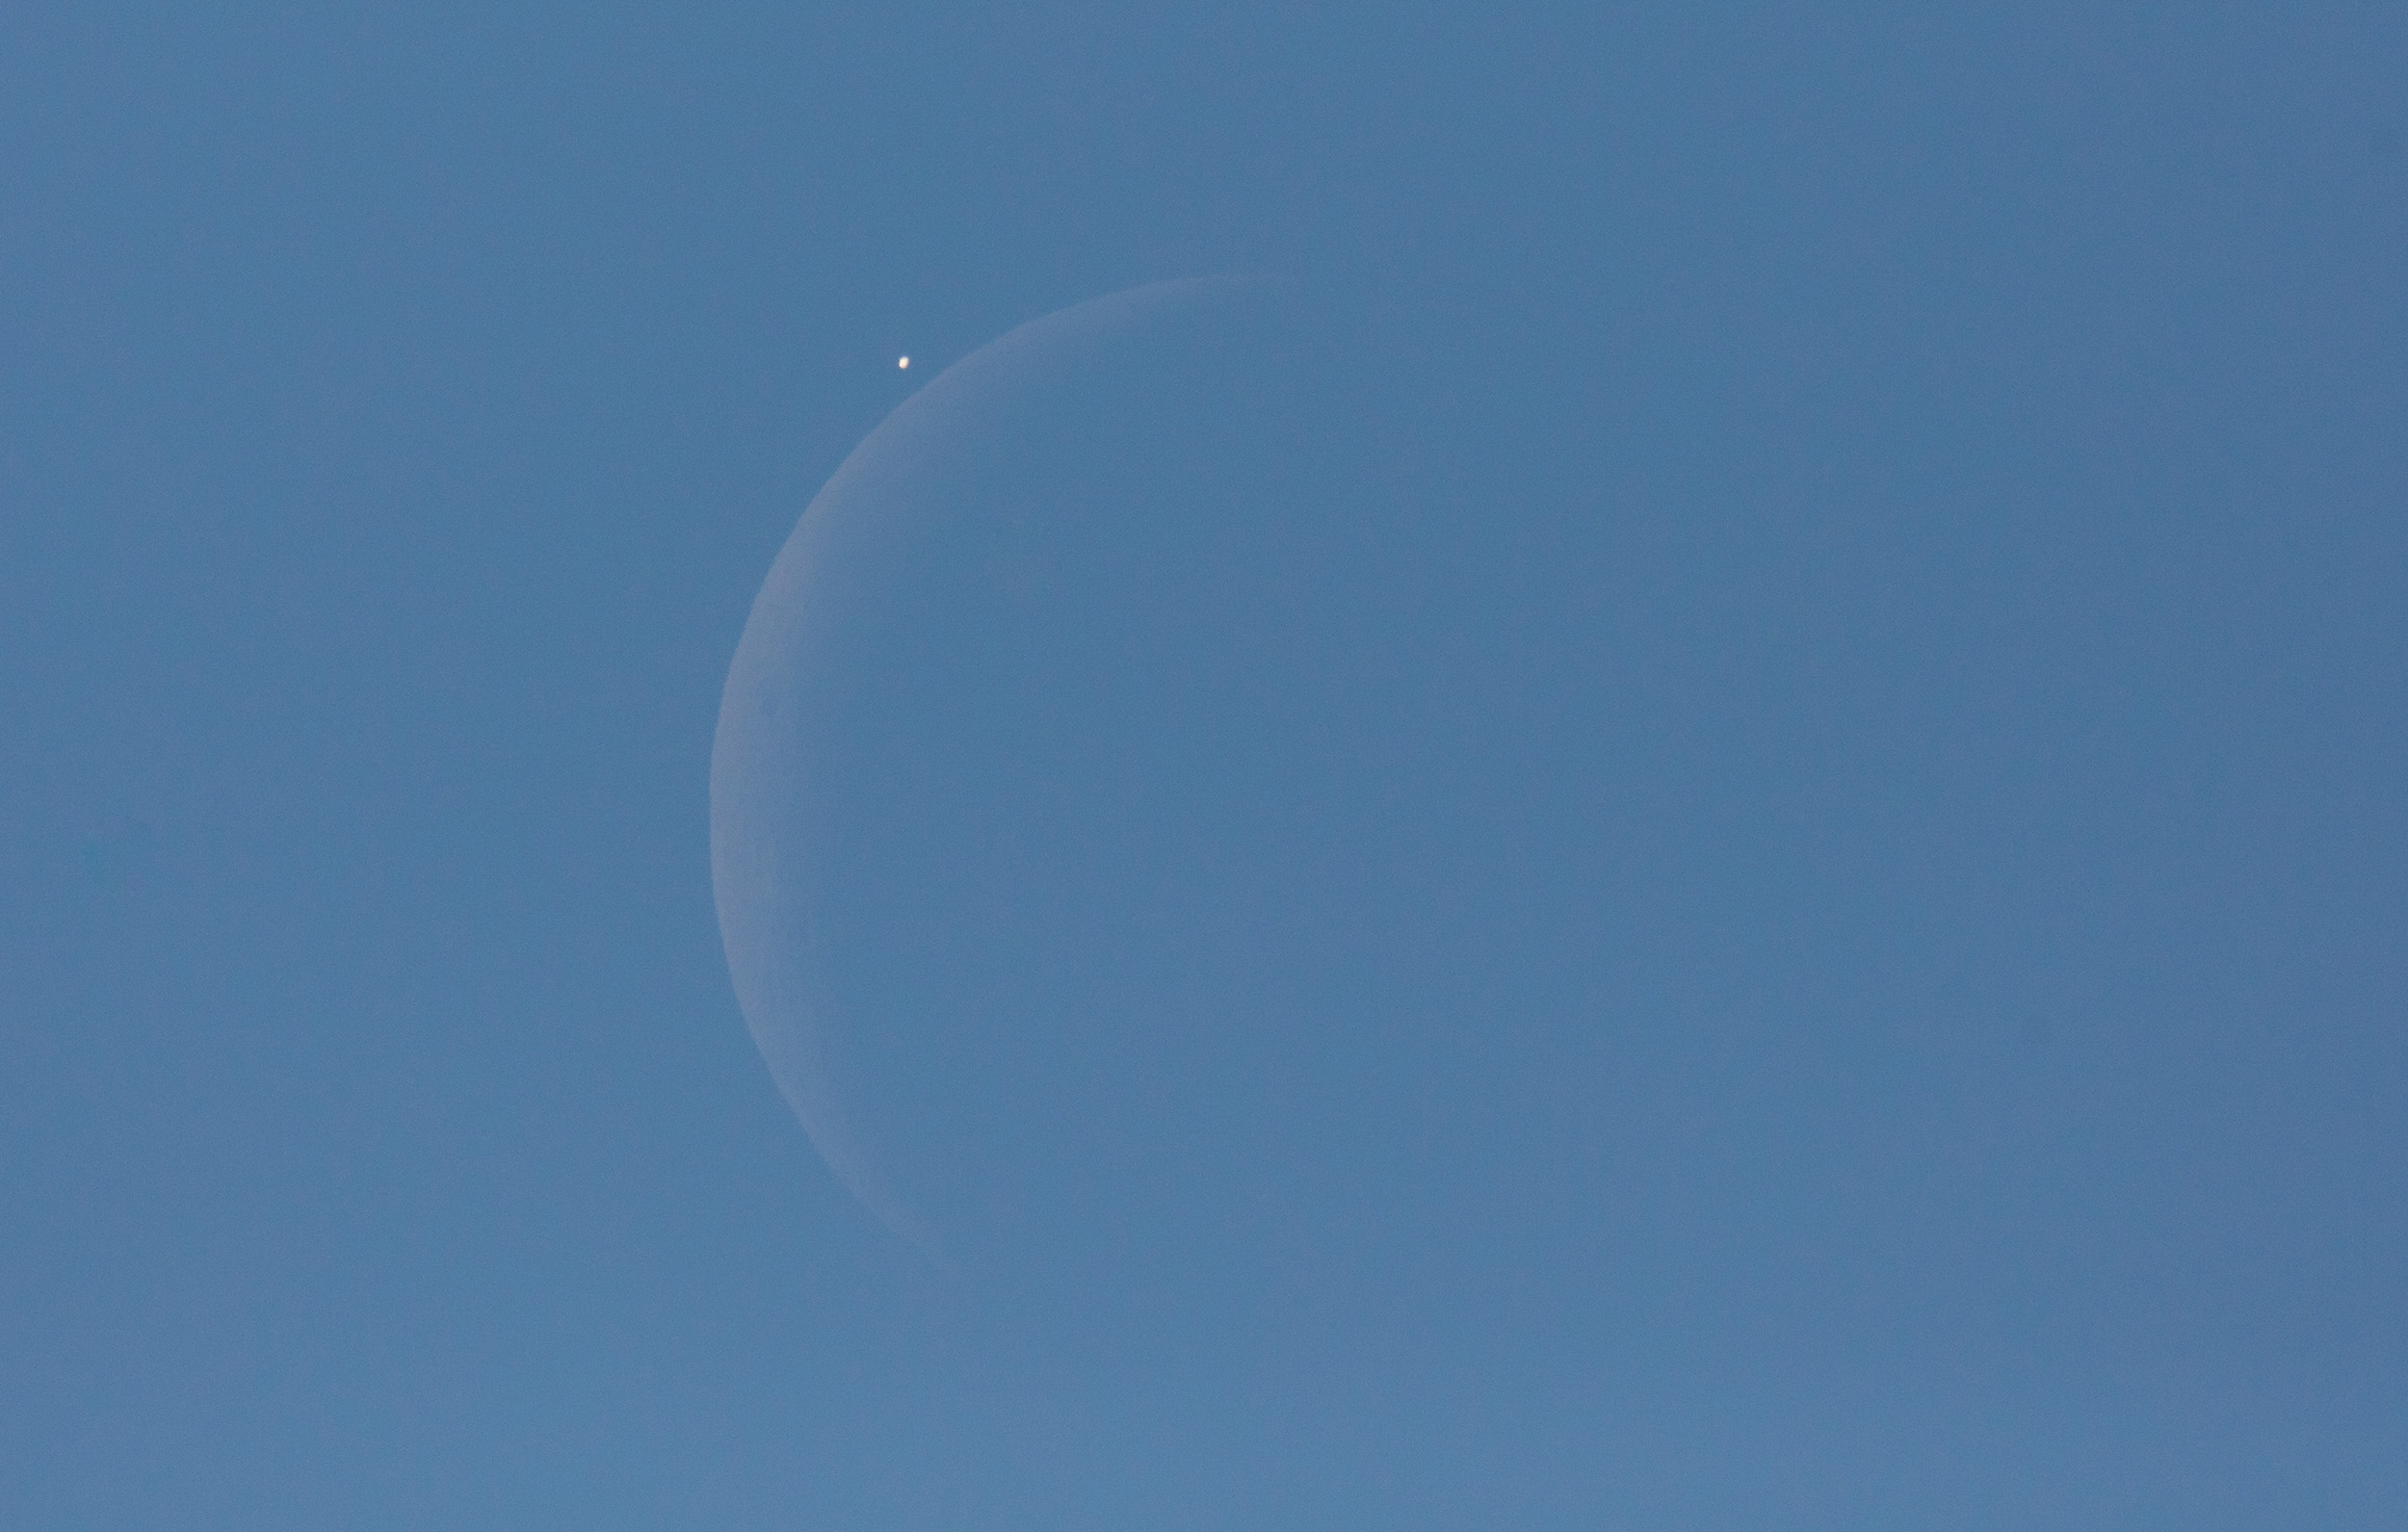 Venus is seen next to the crescent moon during the daytime, prior to the start of occultation in Washington, D.C. on Dec. 7, 2015.  The moon had occulted, or passed in front of, Venus for the second time that year. (Joel Kowsky—NASA)